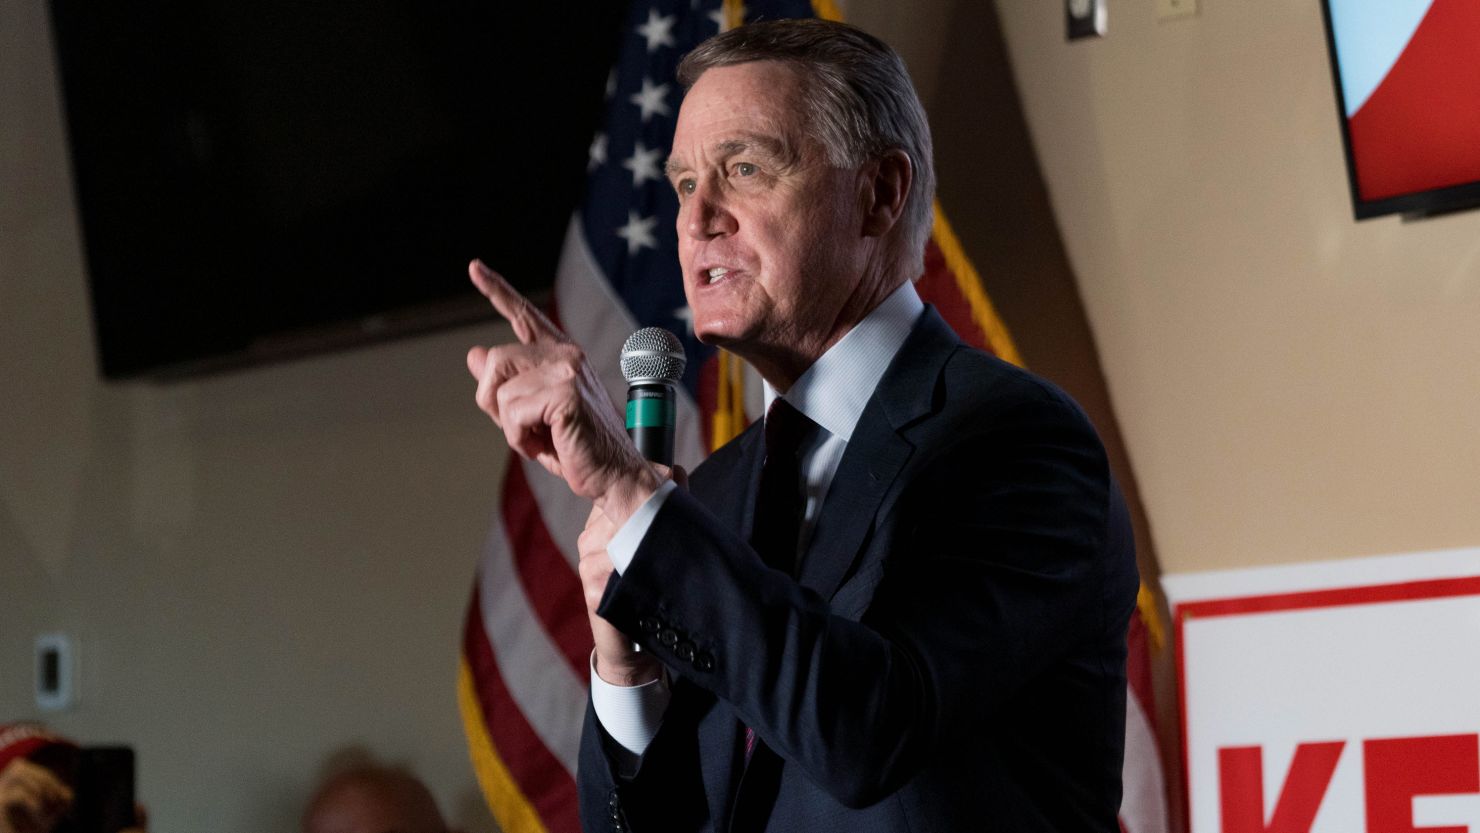 Then-US Sen David Perdue, a Georgia Republican, speaks at a campaign event to supporters at a restaurant on November 13, 2020 in Cumming, Georgia